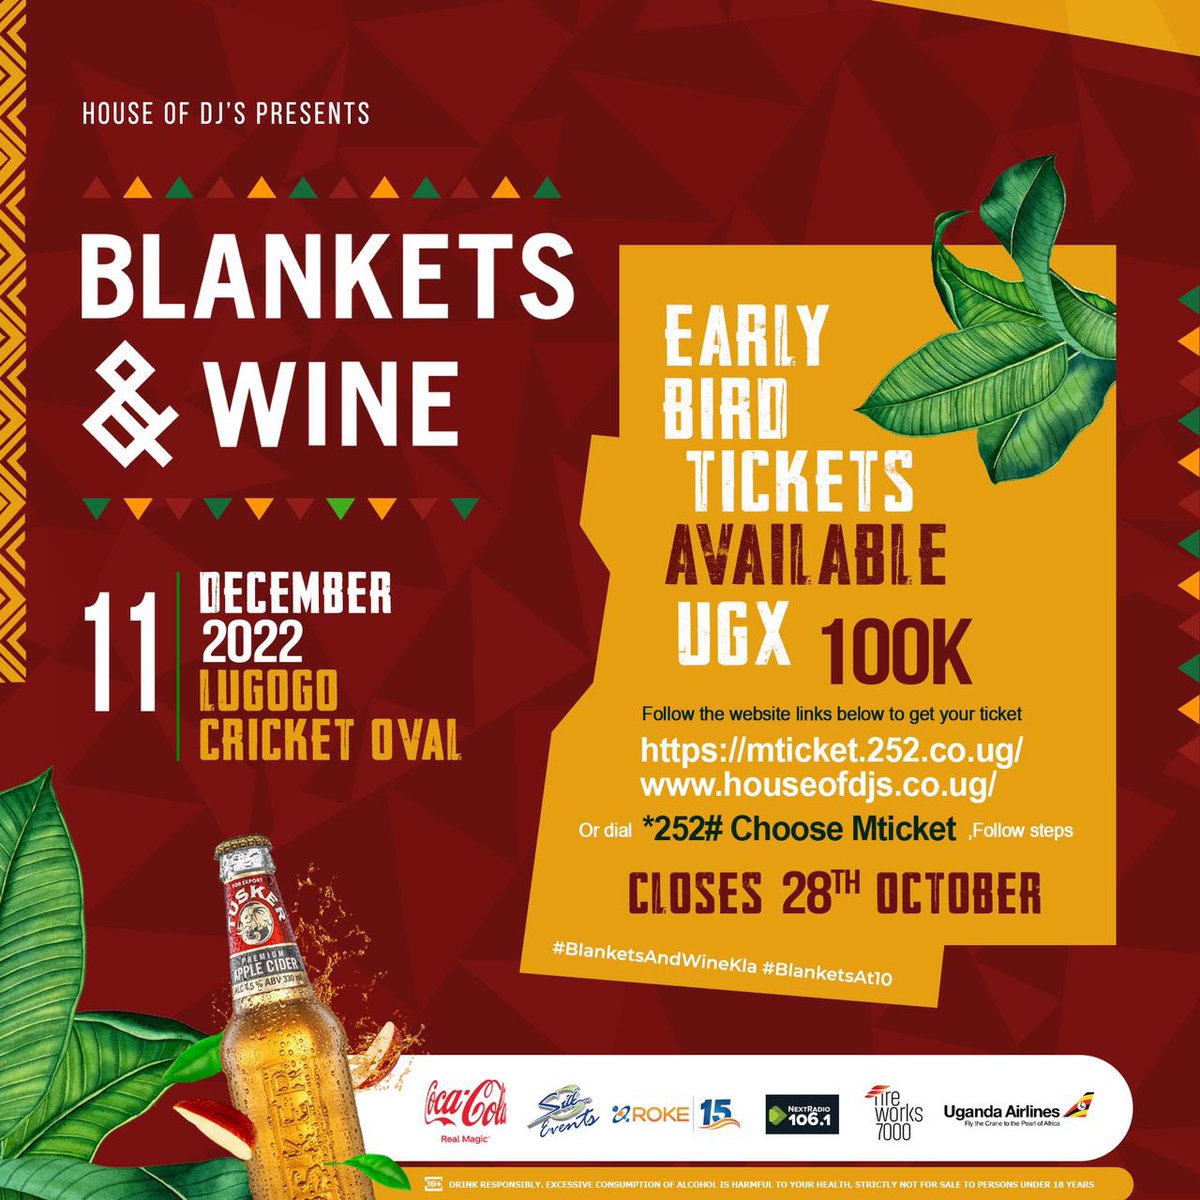 Early bird tickets offer closes on Friday, so you and your squad need to be quick and grab yours before that!🎫💪🏾 Click houseofdjs.co.ug to purchase or dial *252# choose Mticket and follow the steps 11.12.2022 | Lugogo Cricket Oval #BlanketsAndWineKla #BlanketsAt10